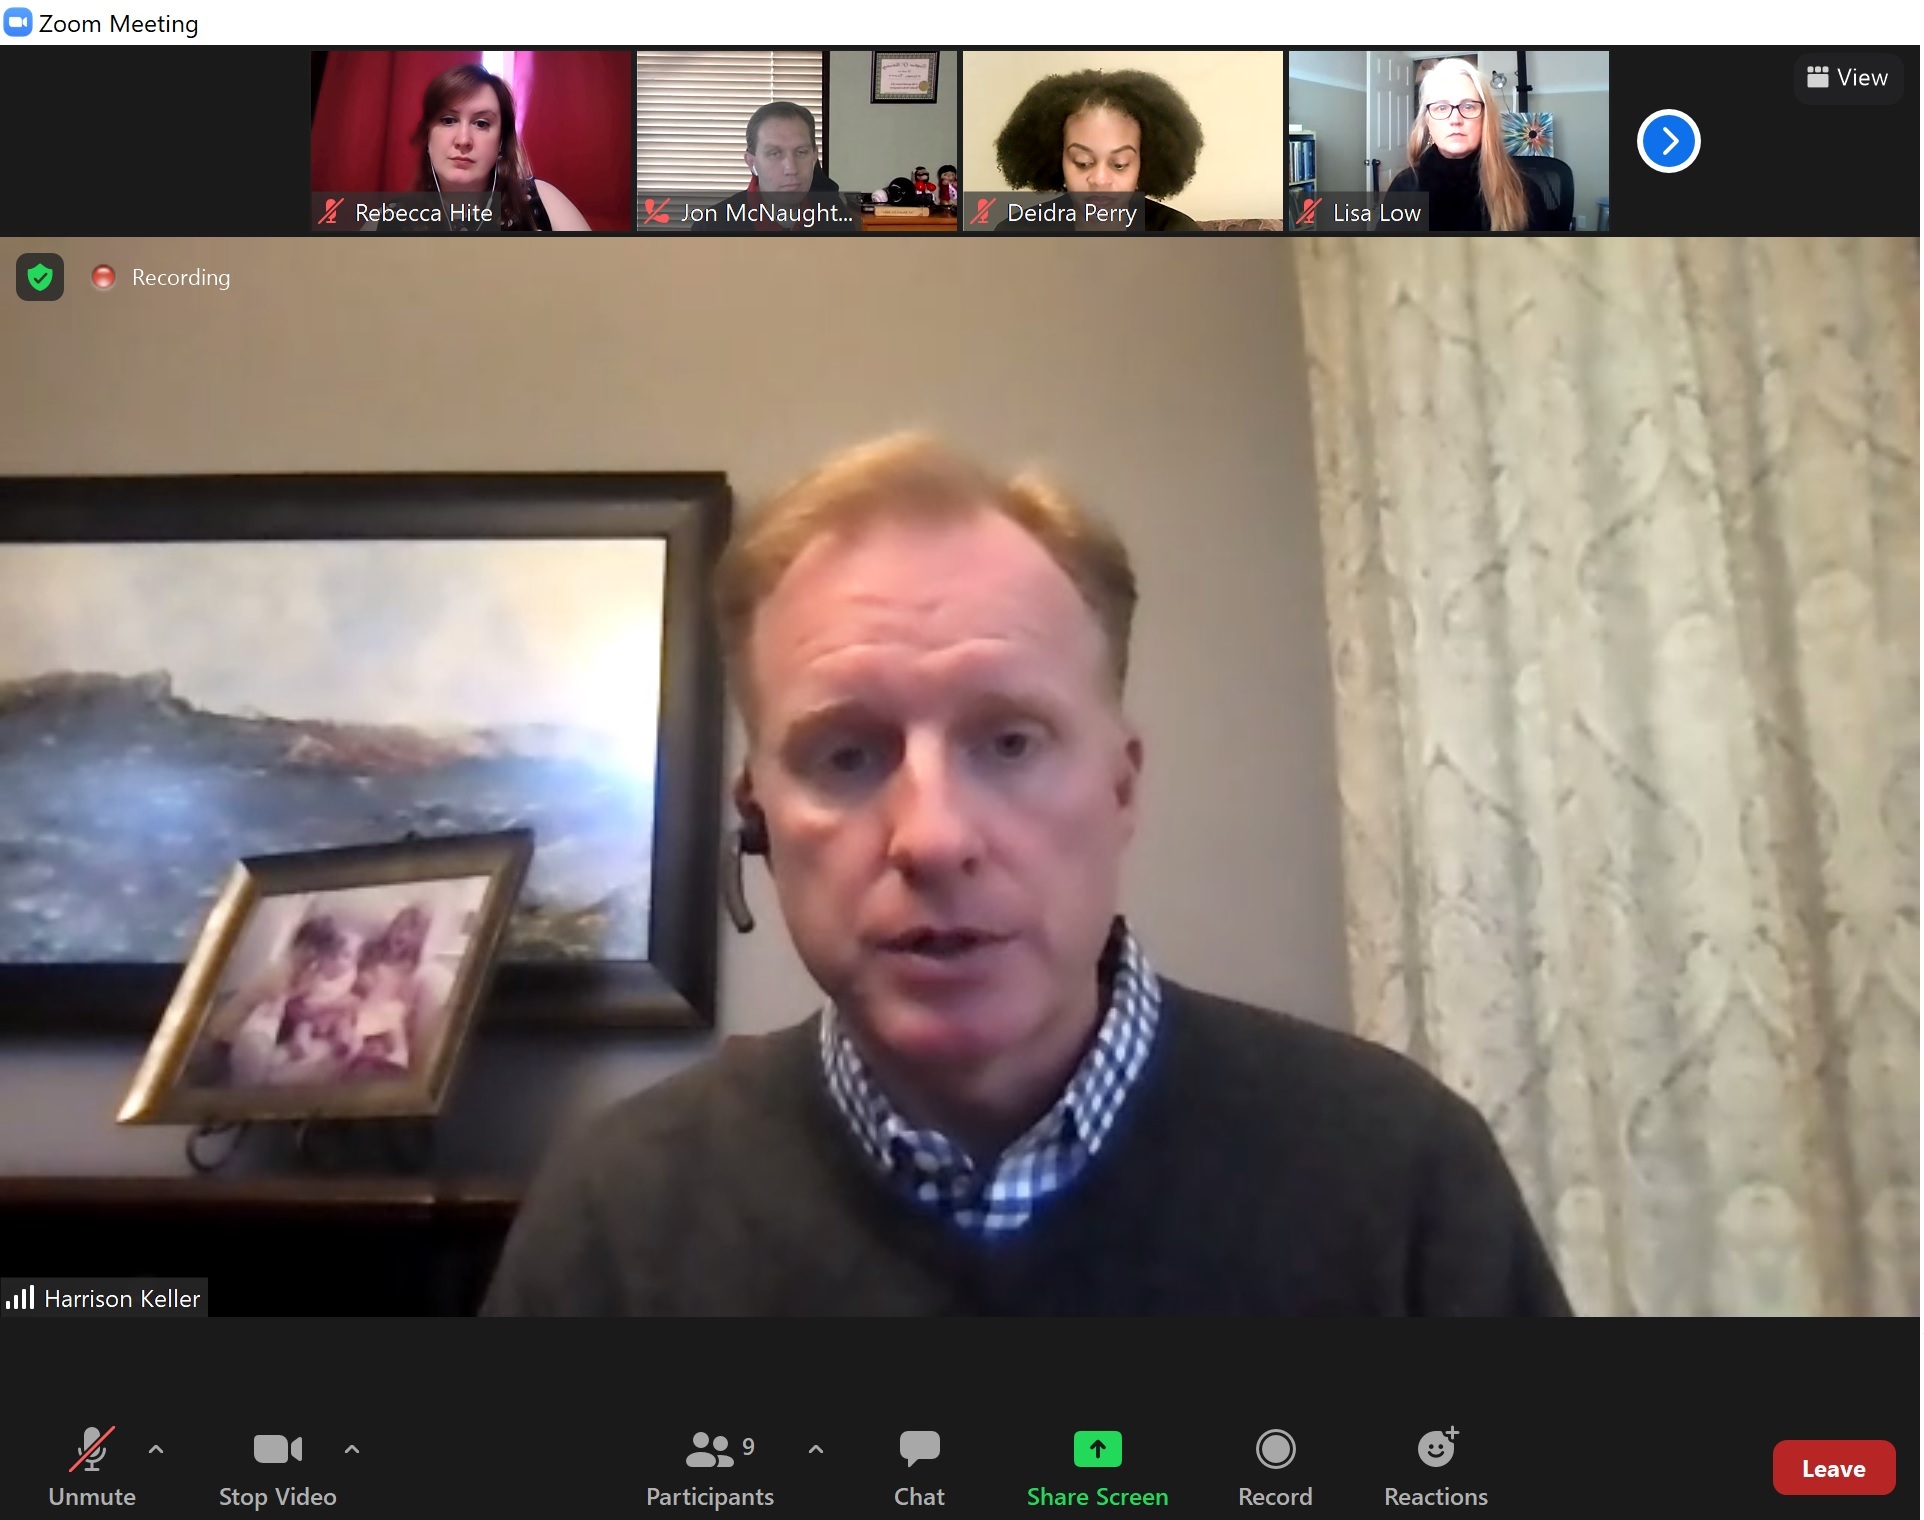 Zoom meeting with Dr. Harrison Keller, Commissioner of Higher Education for the State of Texas